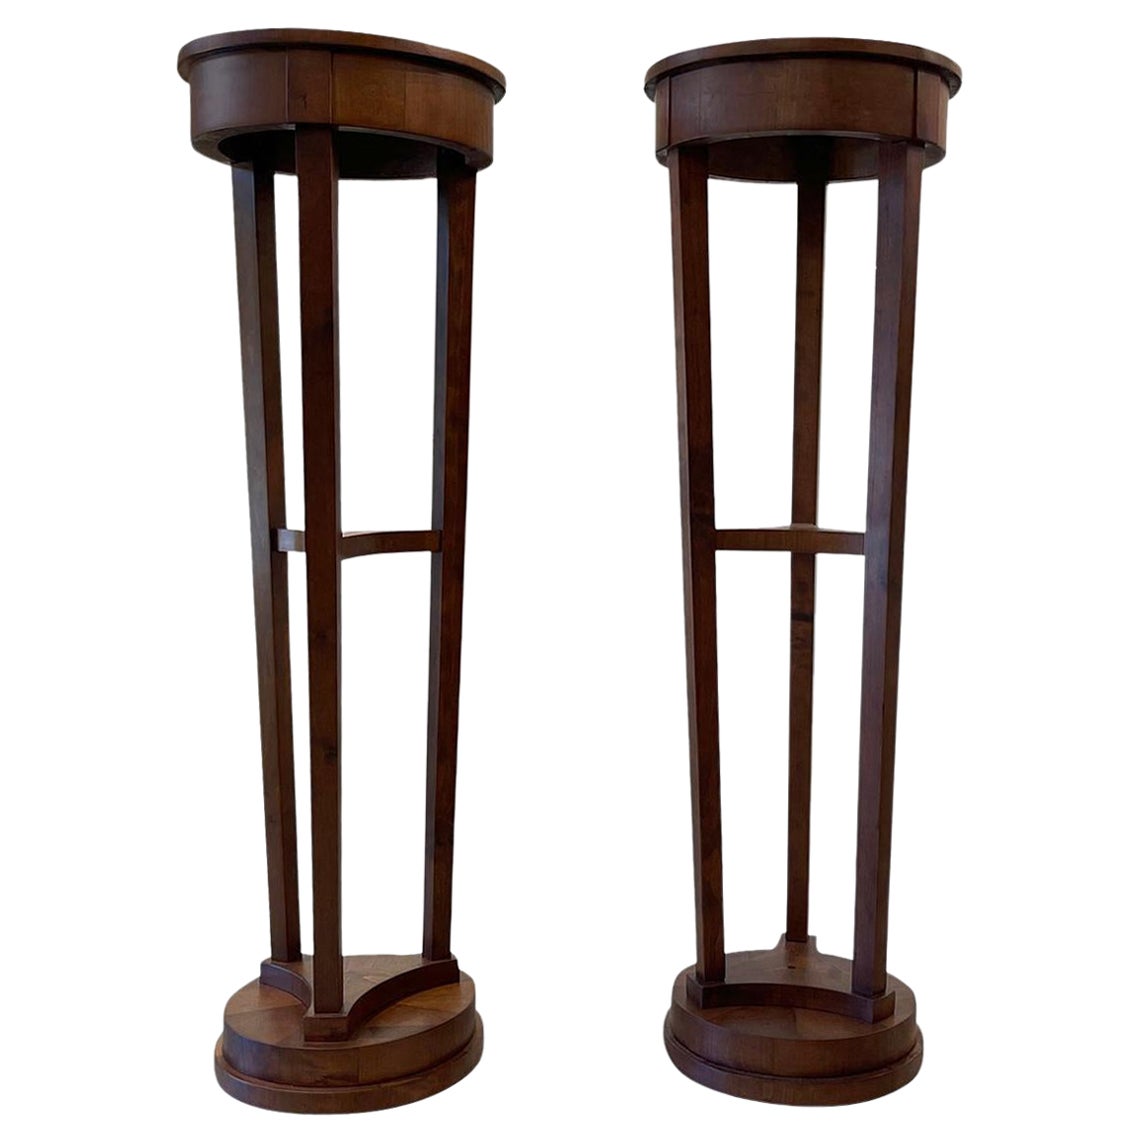 19th Century French Empire Pair of Antique Polished Mahogany Pedestals